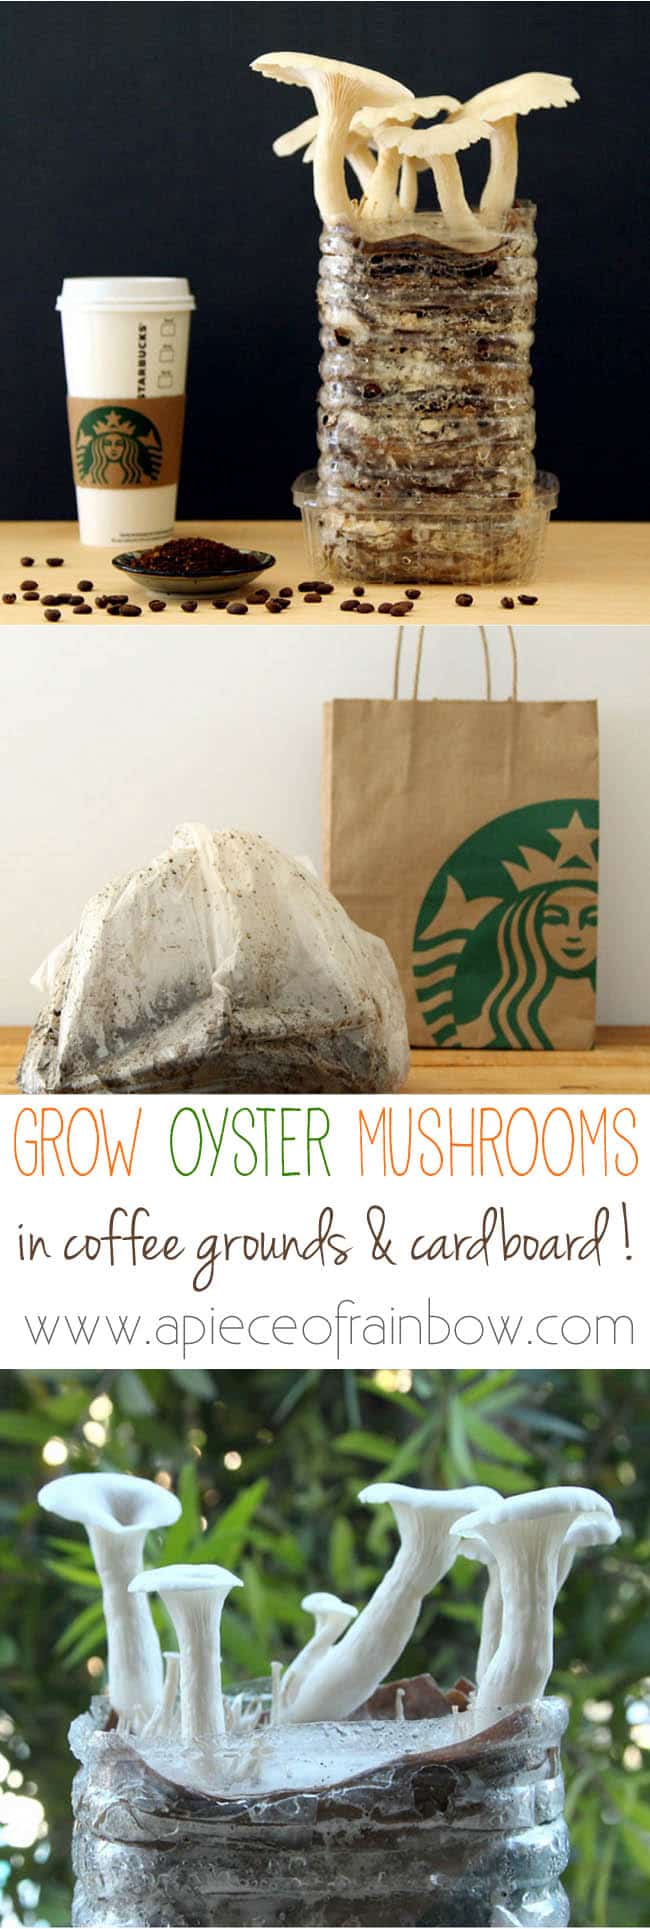 how to grow mushrooms in used coffee grounds and cardboard